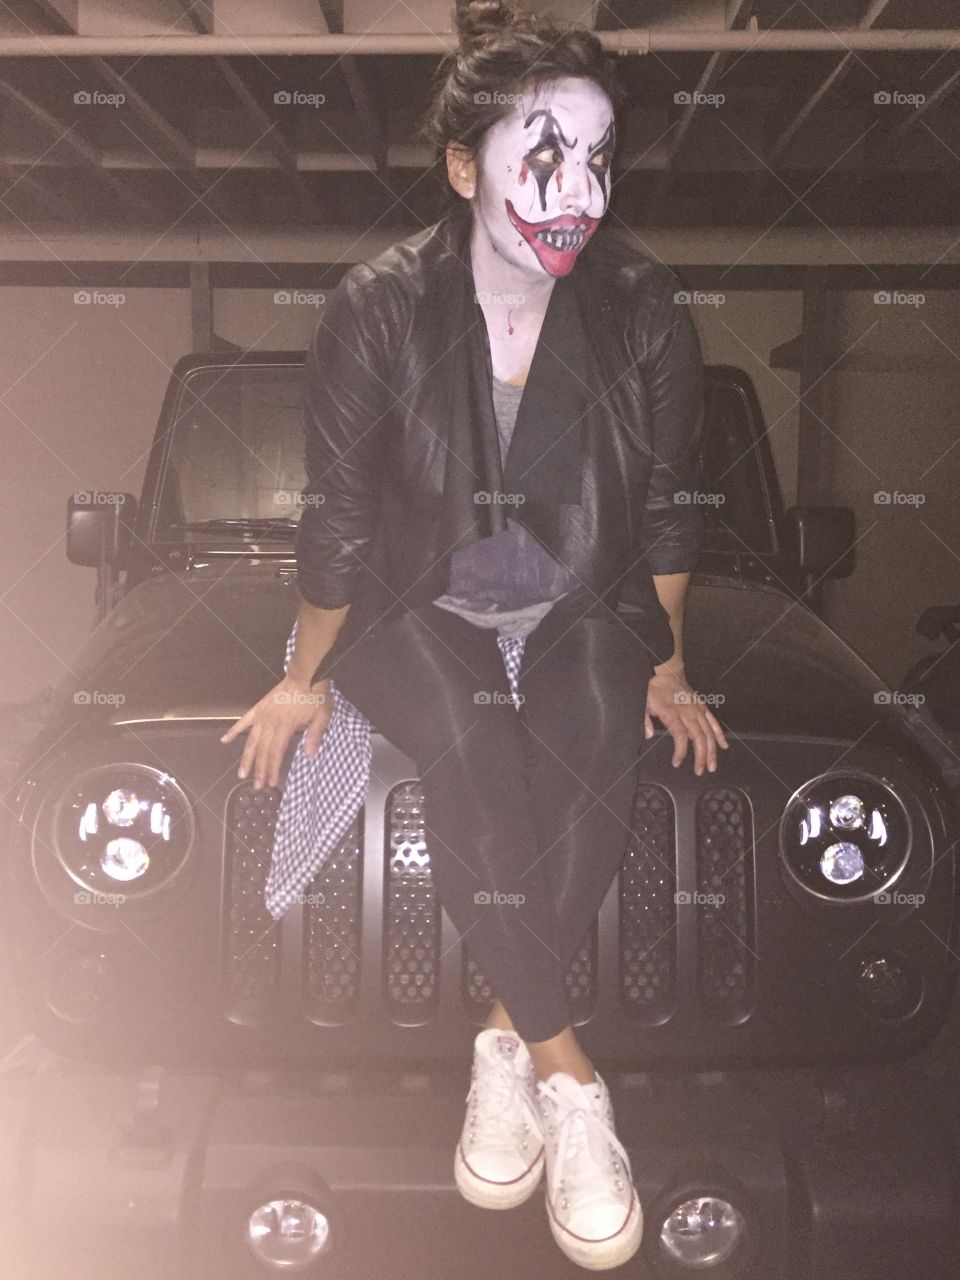 Scary Clown, Halloween, Jeepers Creepers, Jeep Clown, Her, She Clown